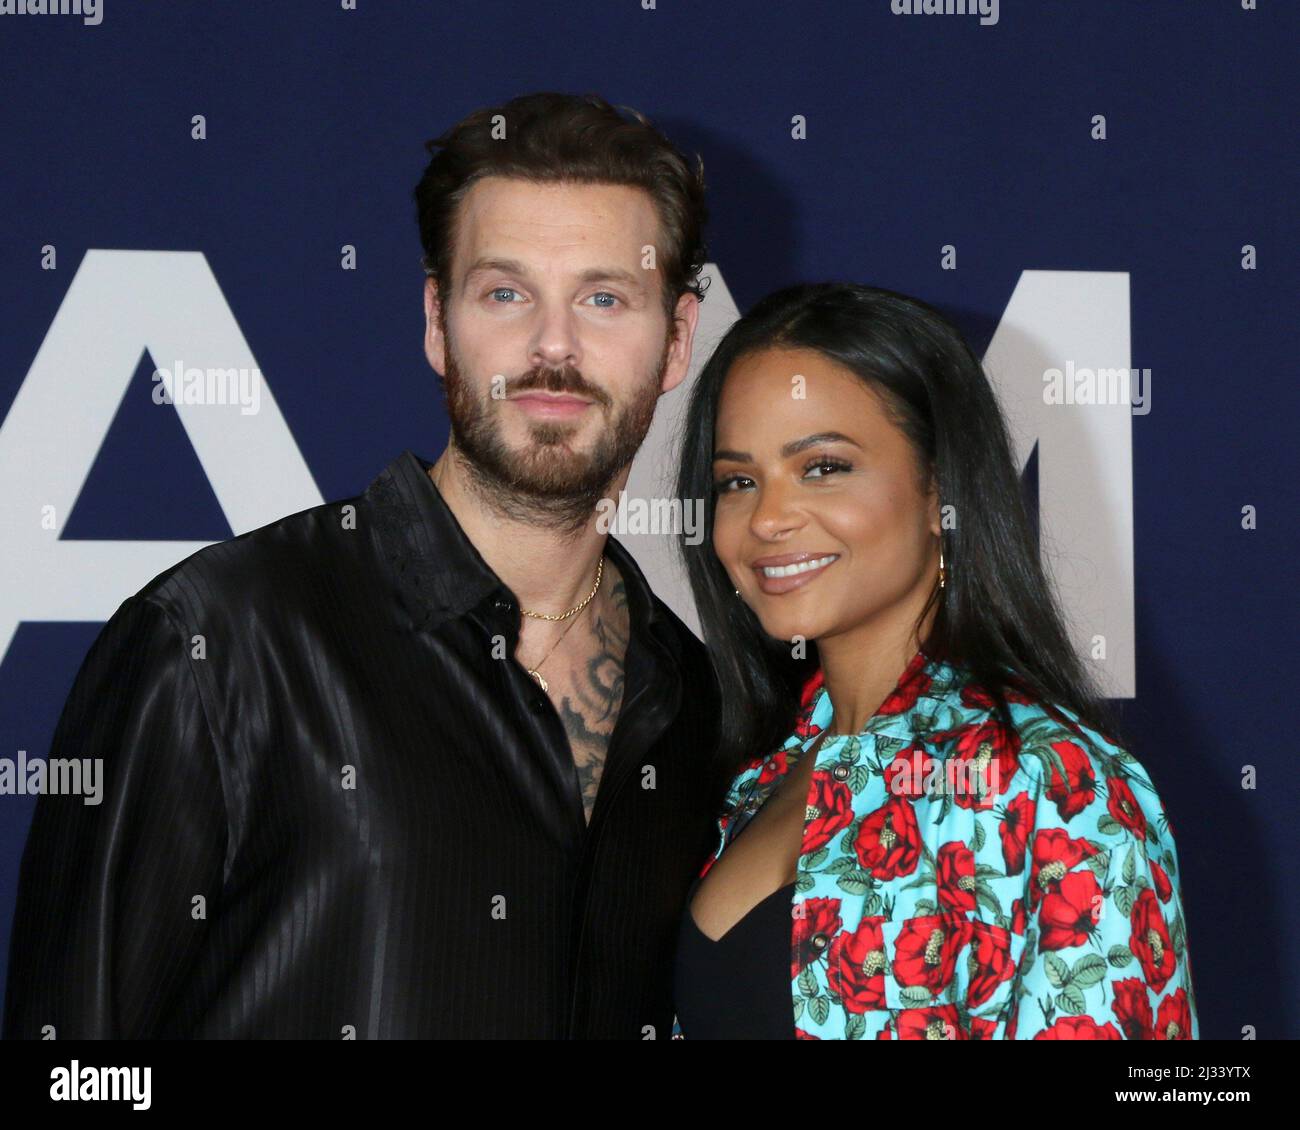 Los Angeles, CA. 4th Apr, 2022. Matt Pokora, Christina Milian at arrivals for AMBULANCE Premiere, The Academy Museum of Motion Pictures, Los Angeles, CA April 4, 2022. Credit: Priscilla Grant/Everett Collection/Alamy Live News Stock Photo